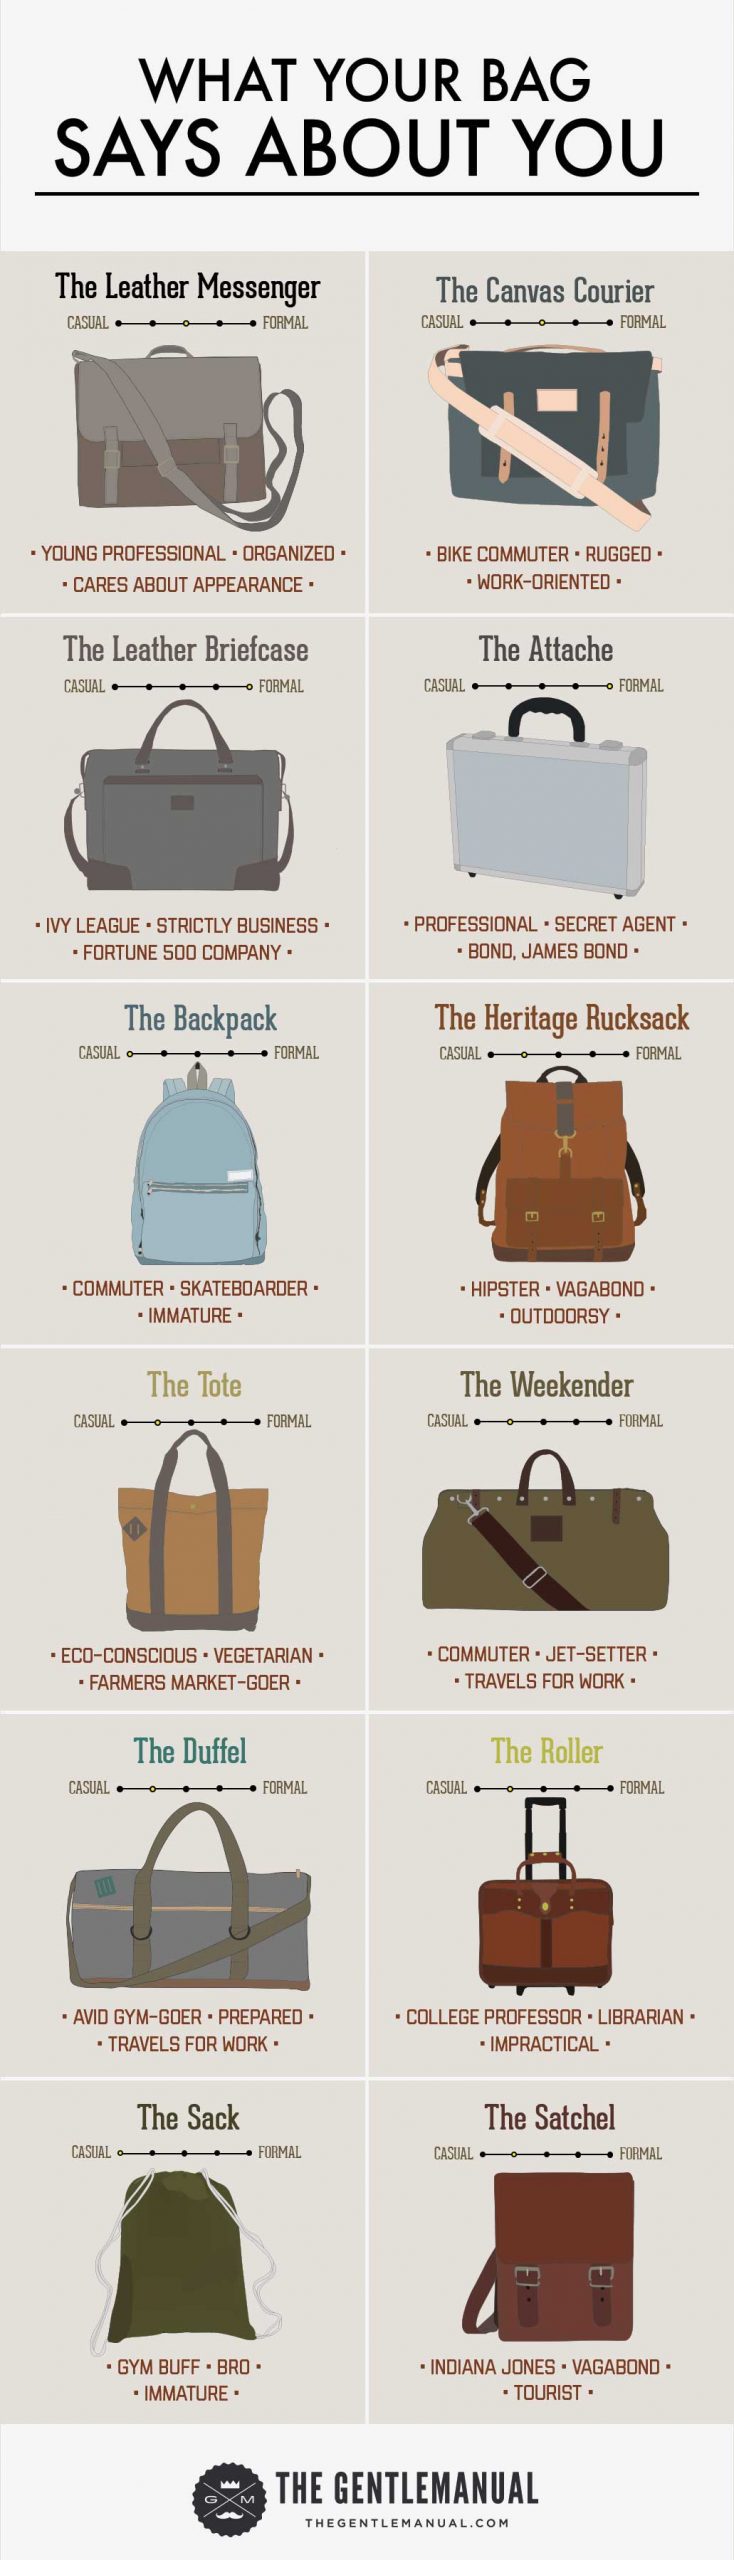 what-your-bag-says-about-you-infographic